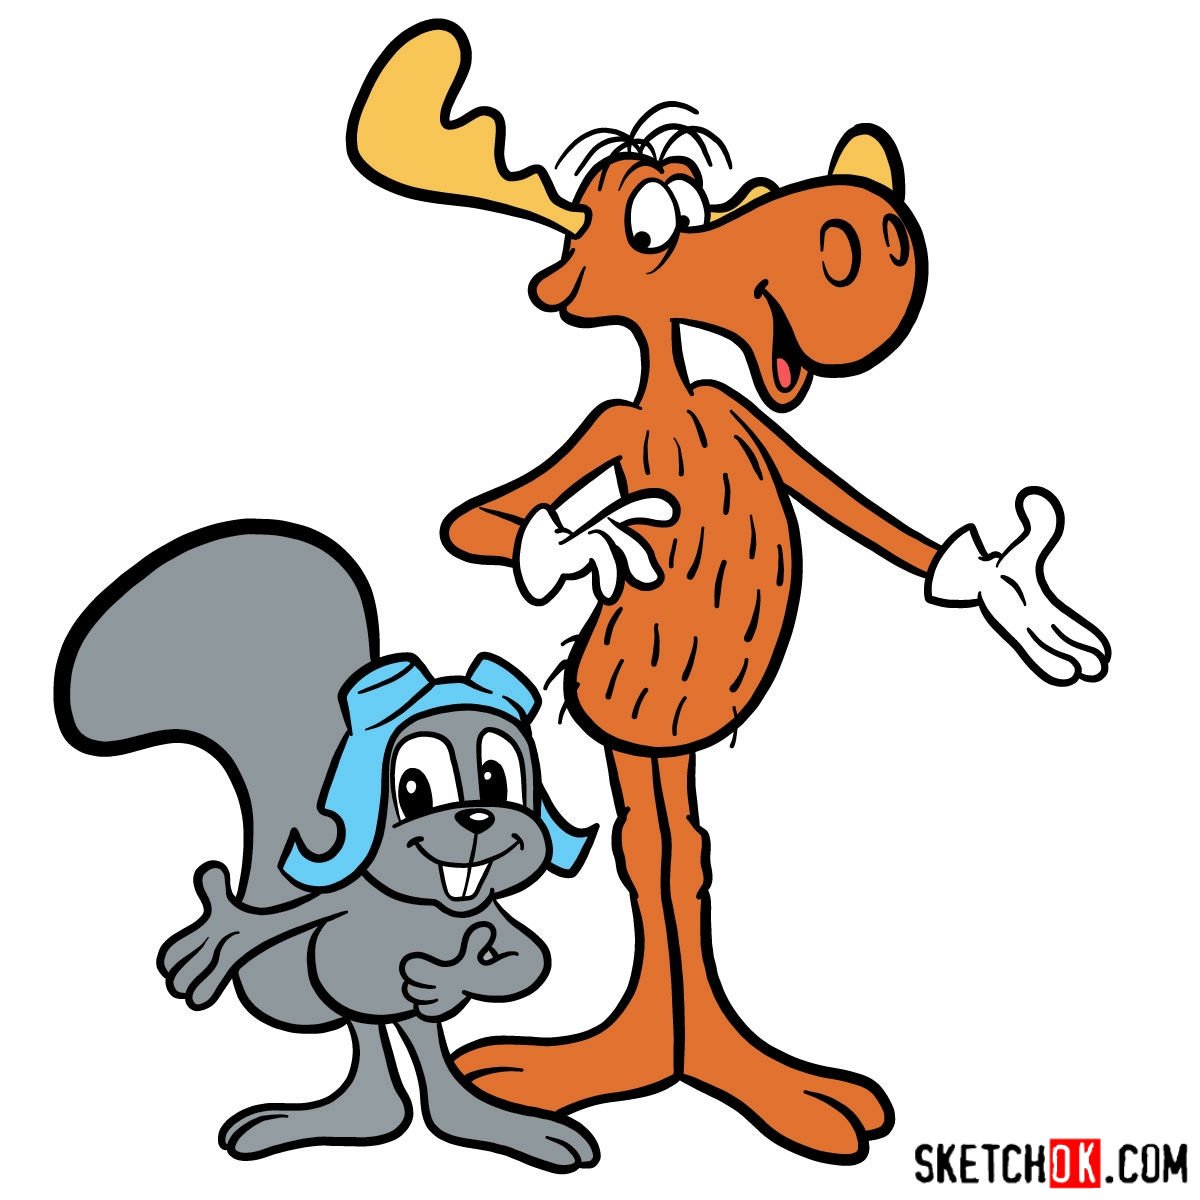 How to draw Rocky and Bullwinkle together